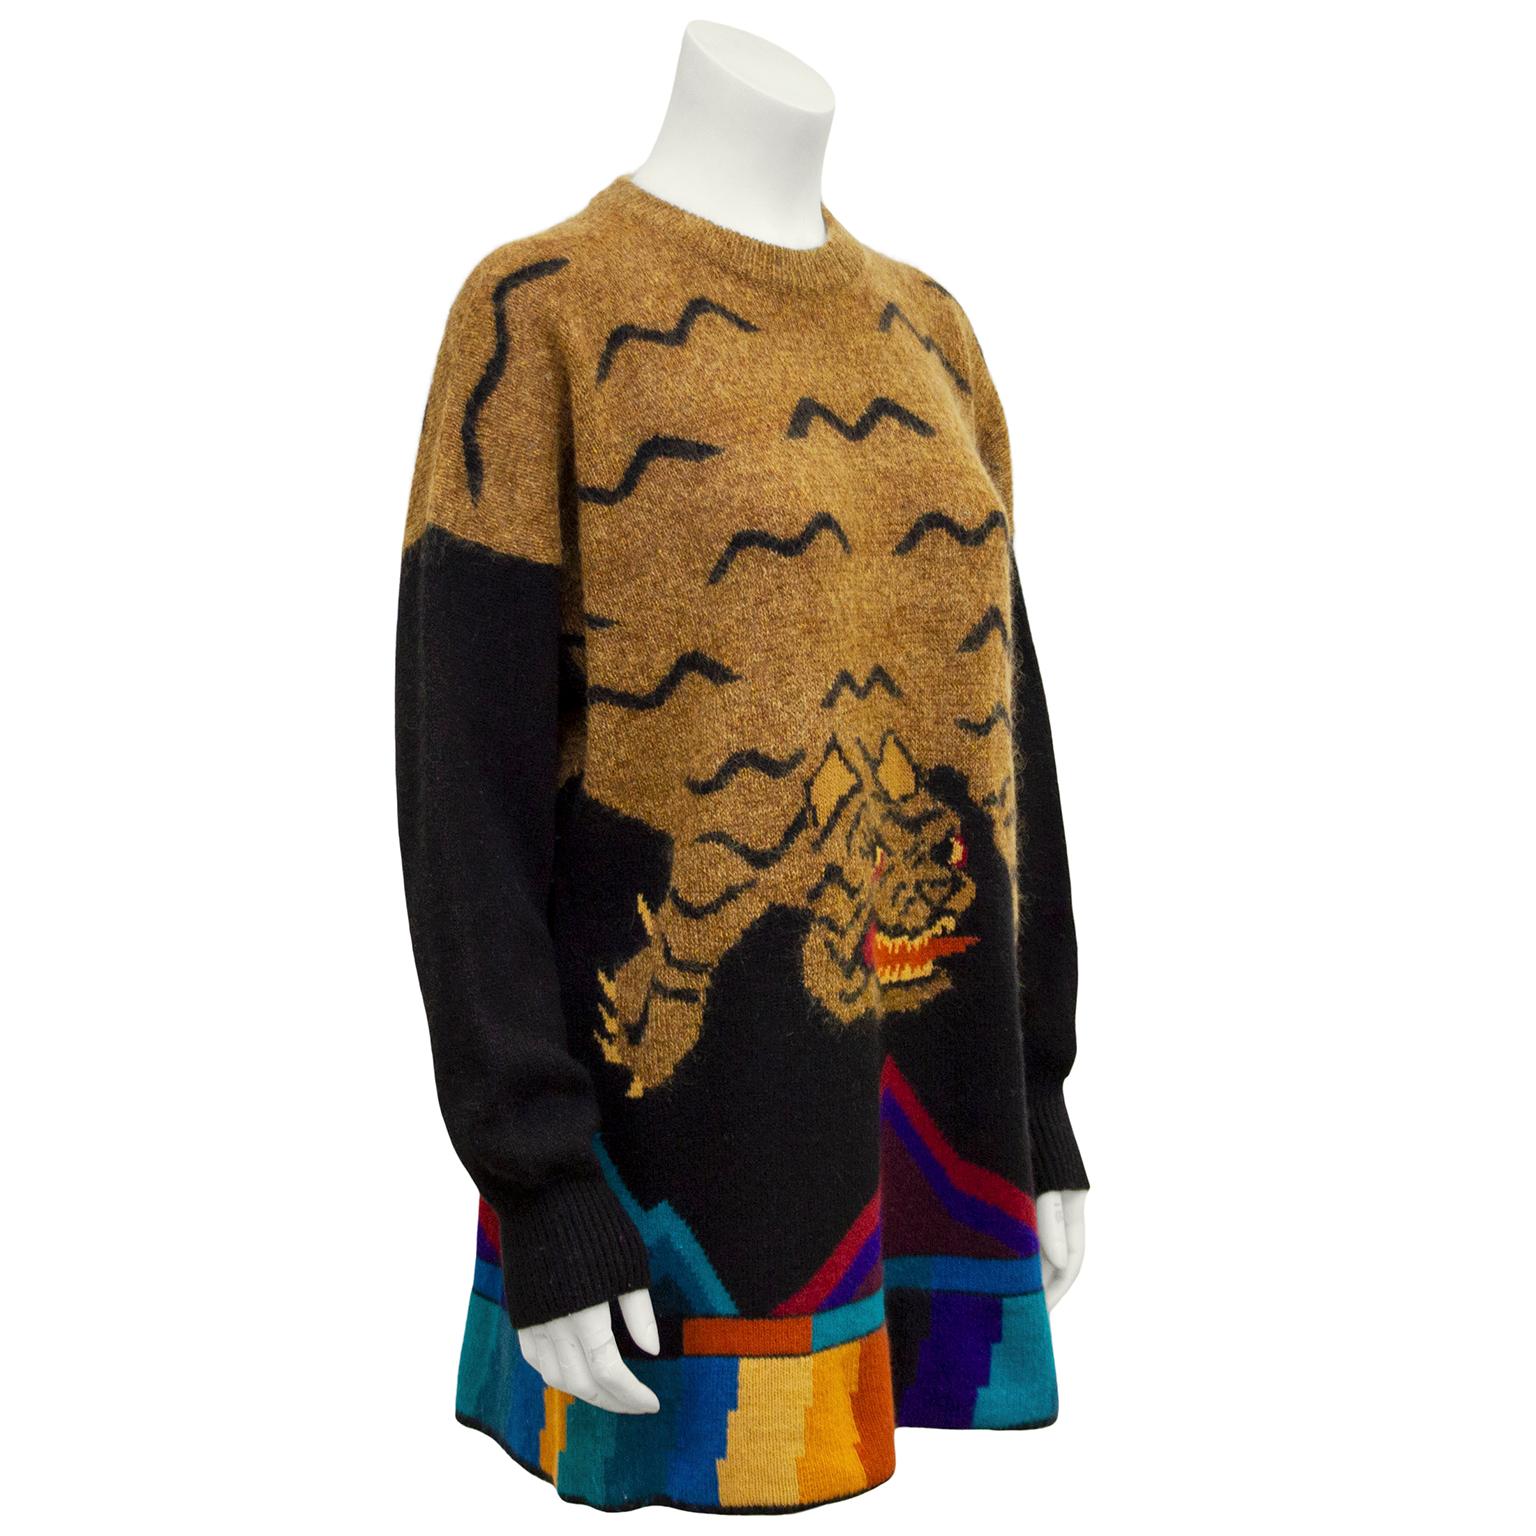 1980s iconic Krizia oversized jungle cat intarsia wool sweater favoured by celebs including the late Princess Diana. Brown and black tiger motif on front and back, as if the tiger is laying over your shoulders. Red, yellow and orange details on